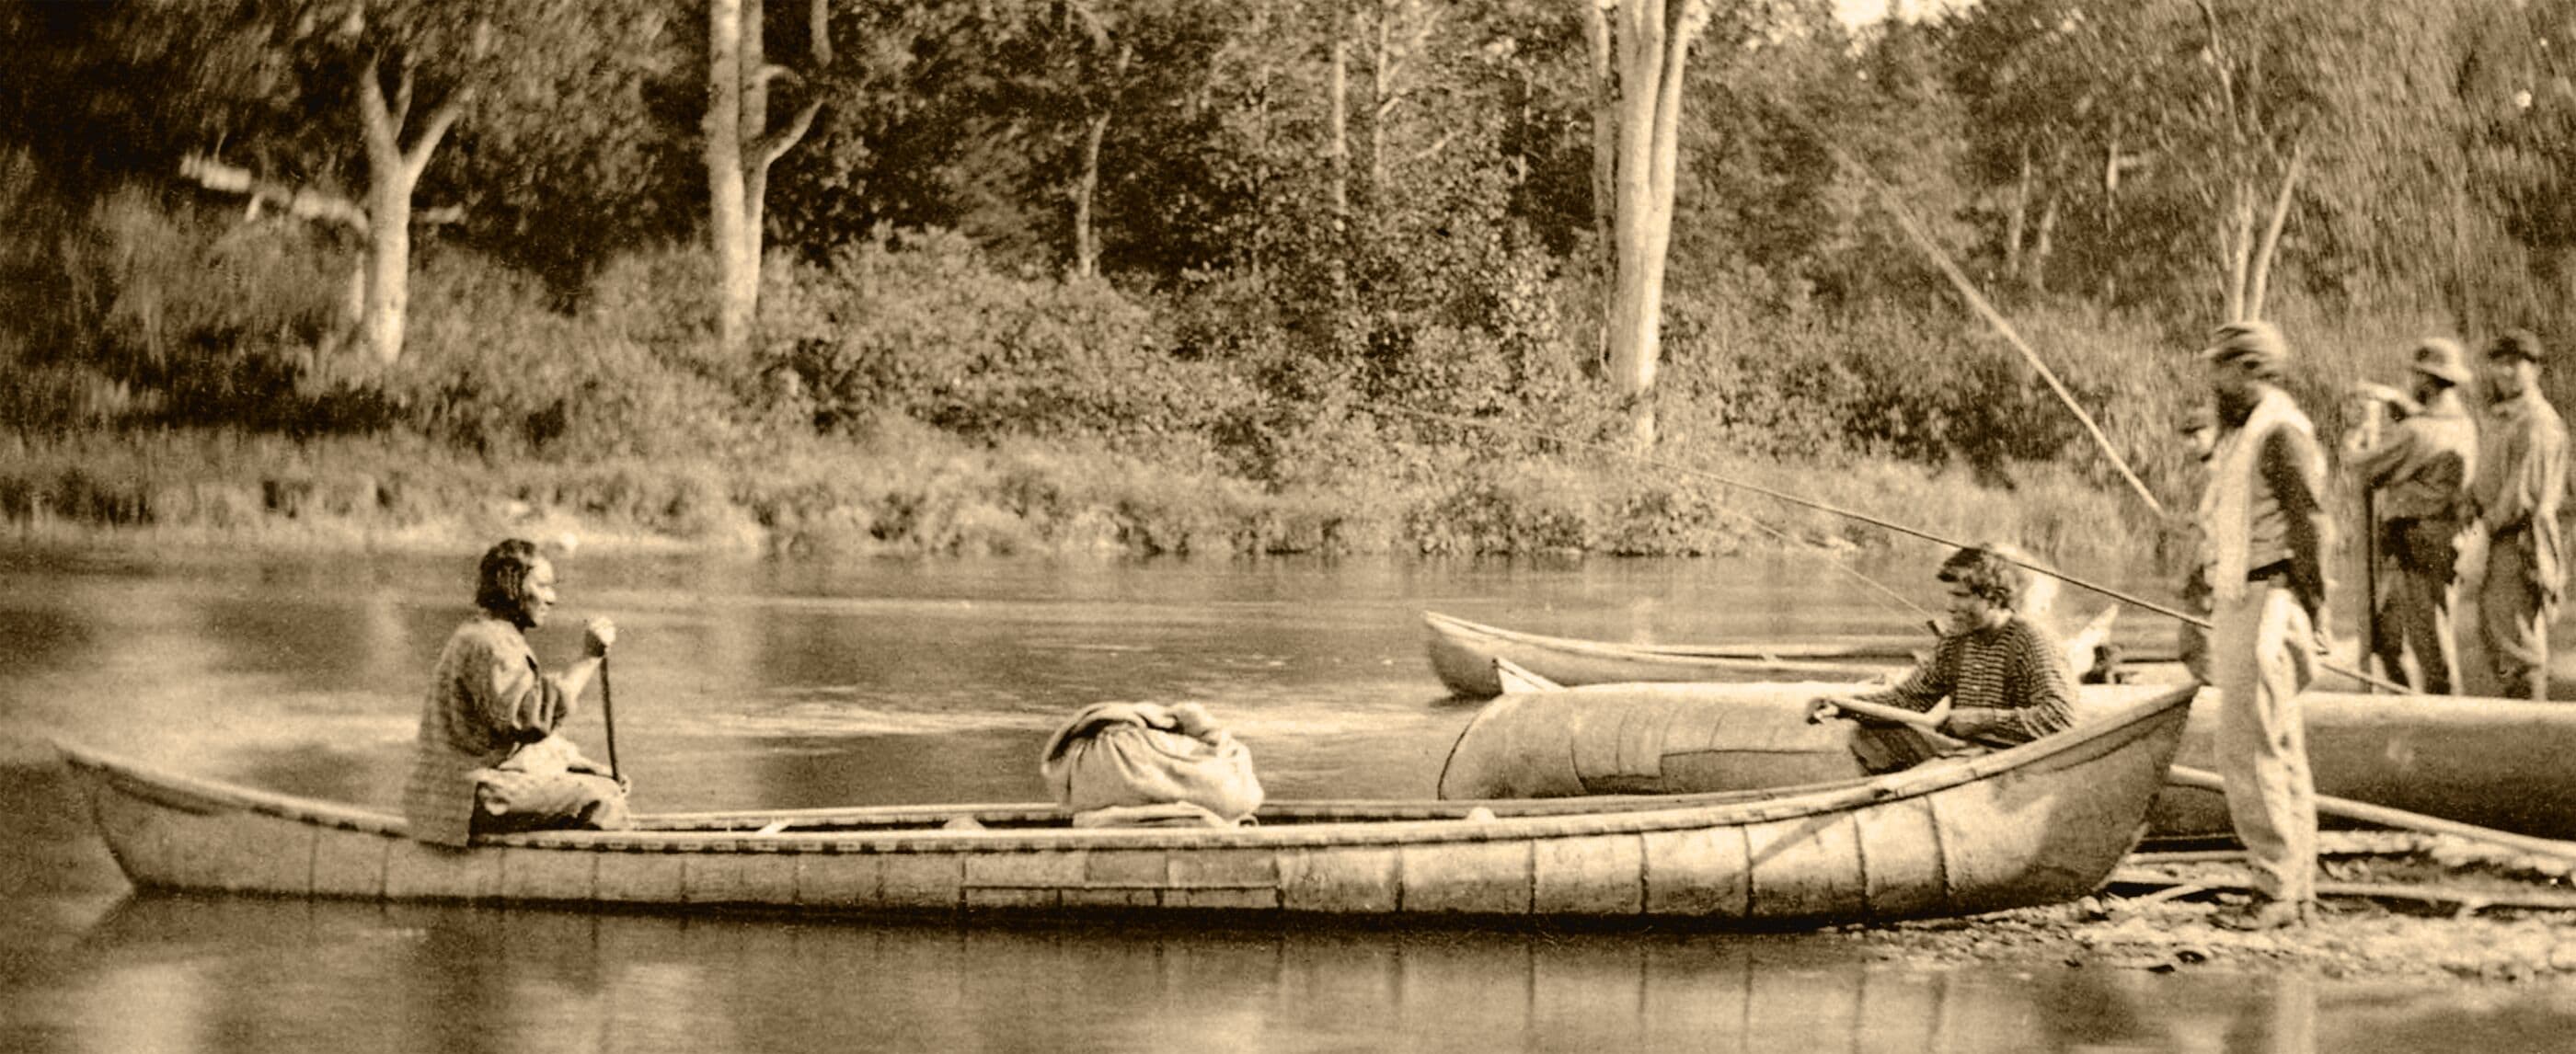 Members of the Micmac tribe in a birchbark canoe in New Brunswick, pre-1870. (Taylor/Collection/Nova Scotia Archives)